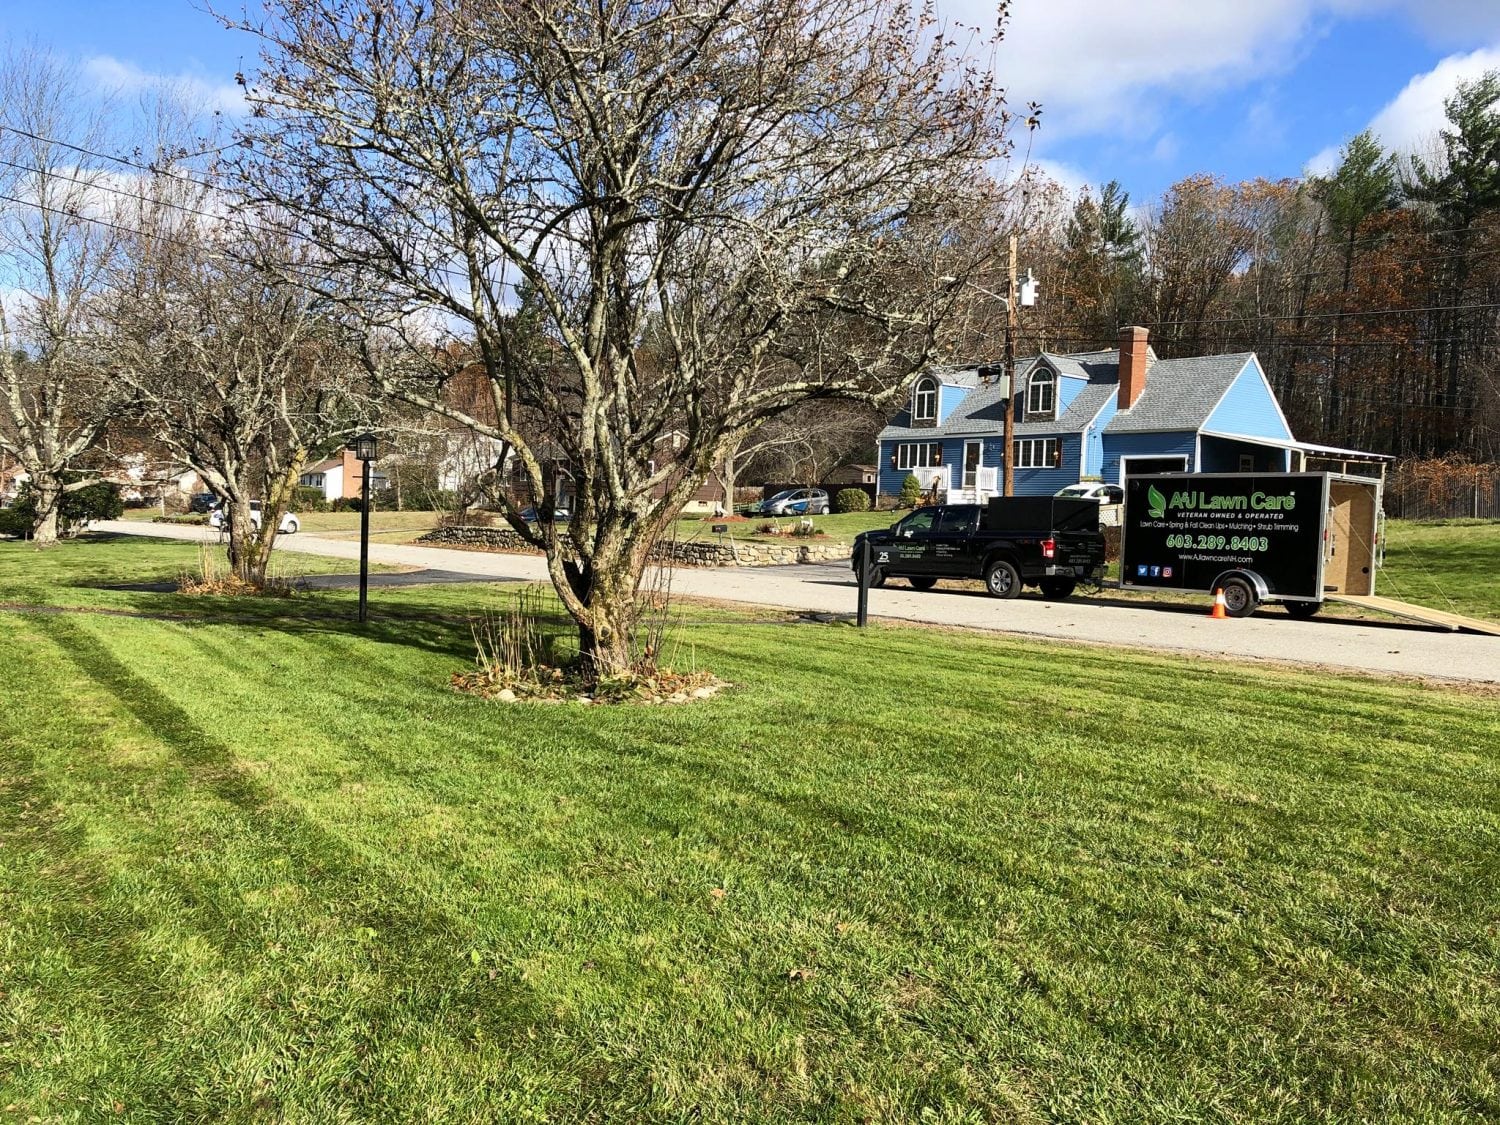 Derry Nh Lawn Care 3 A J, Landscaping Derry Nh